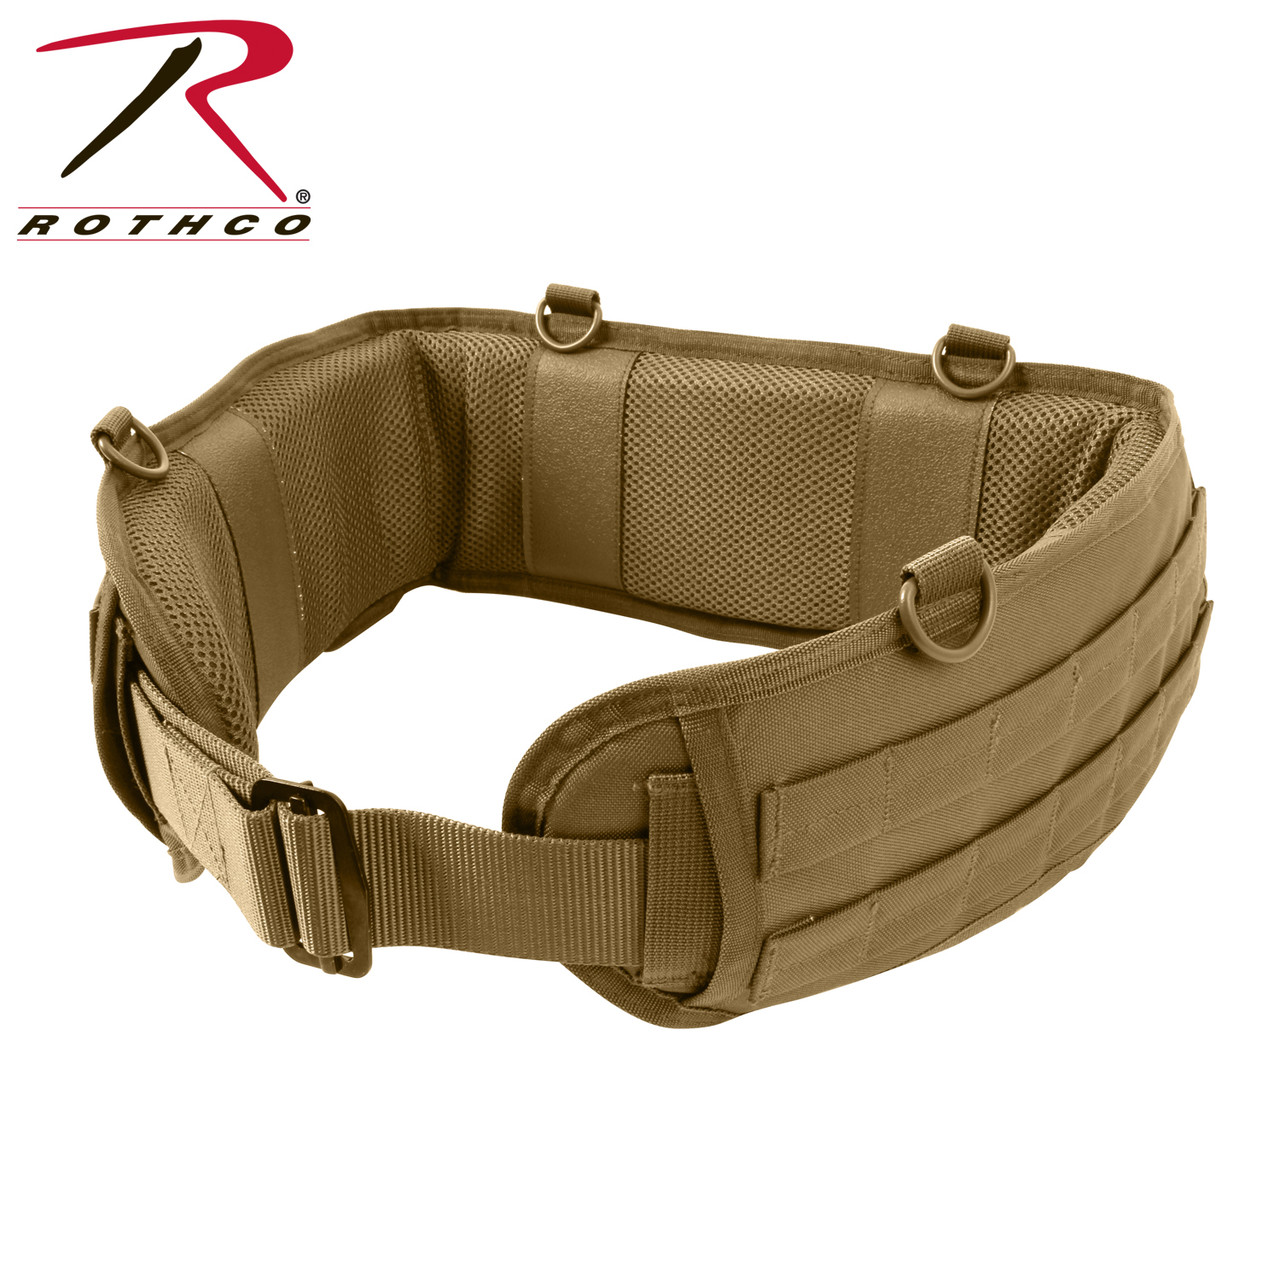 Rothco 2 Inch Triple Retention Buckle